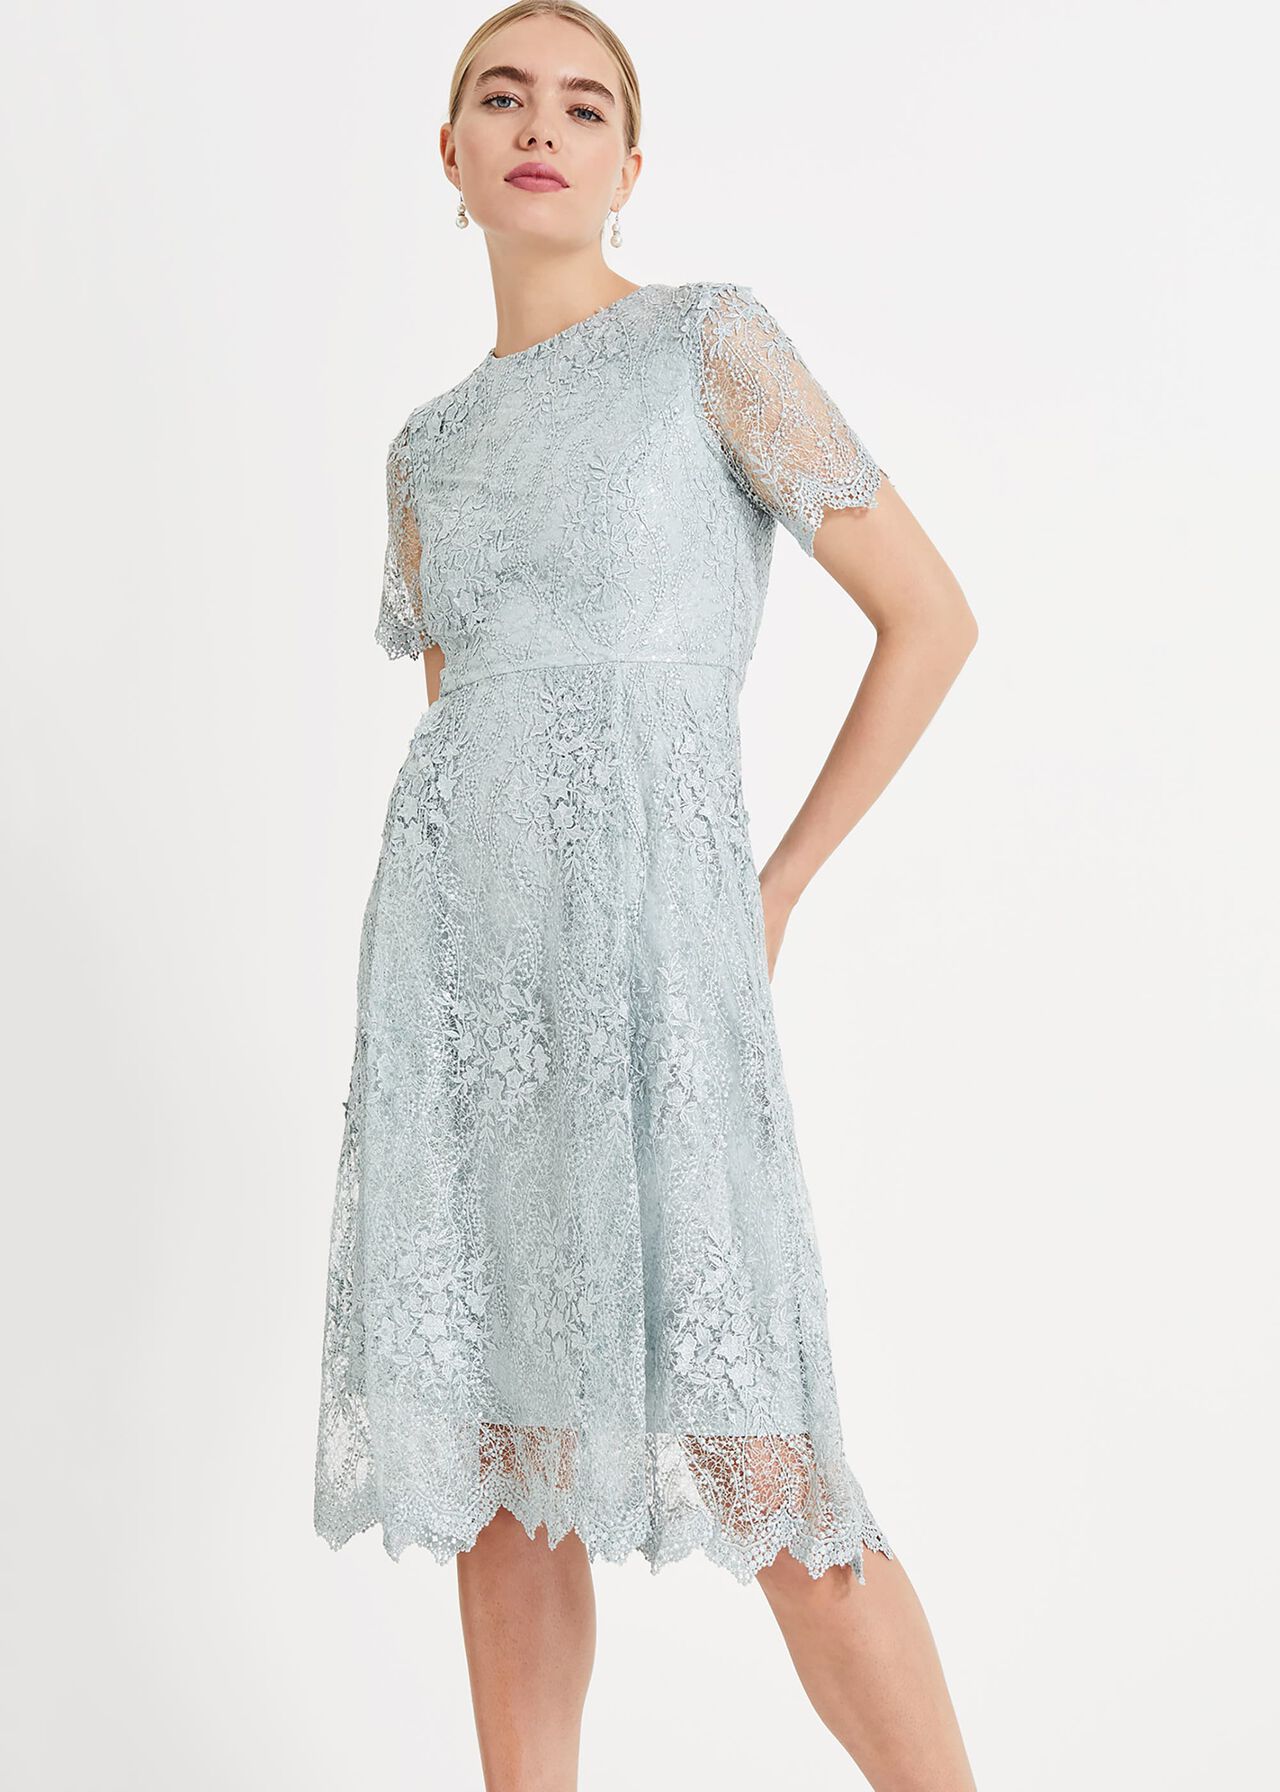 Malia Sequin Lace Dress | Phase Eight